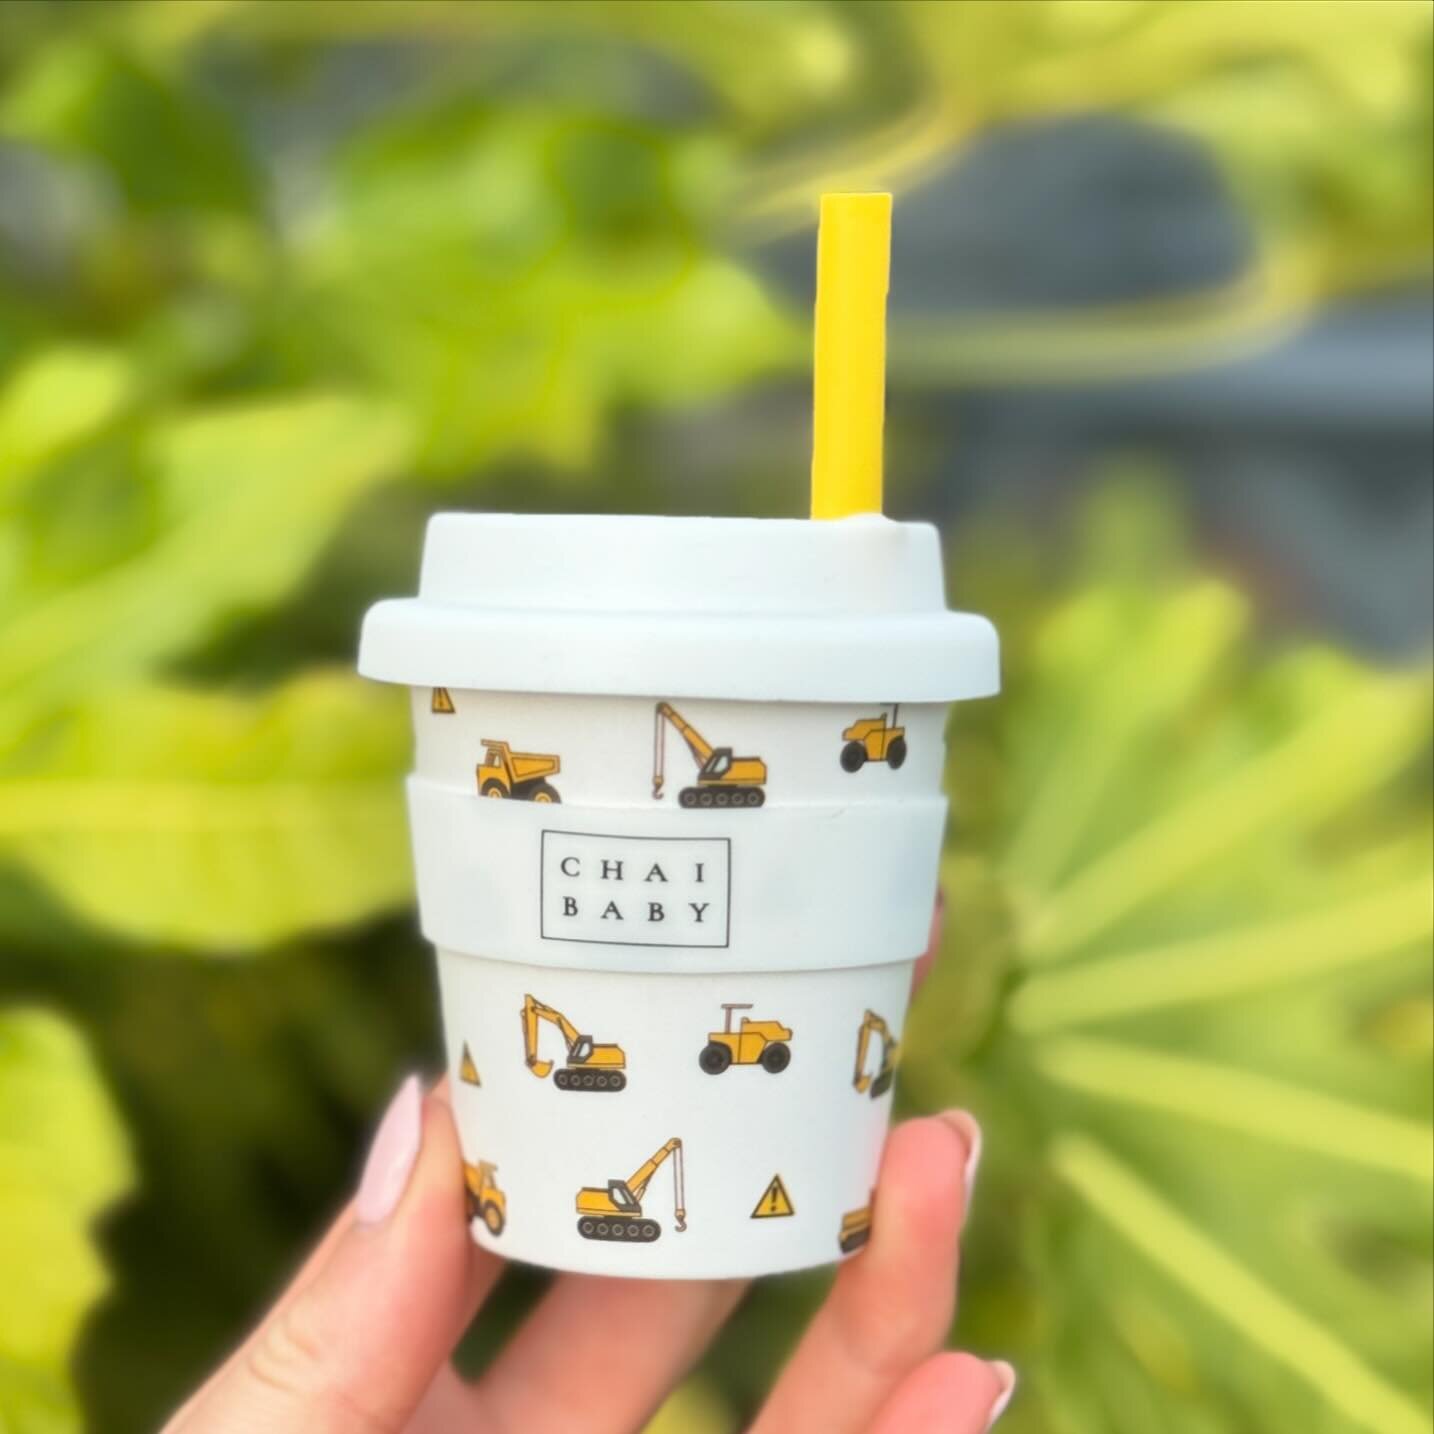 Our best selling construction @chaibabyco cups are back in stock 🚜